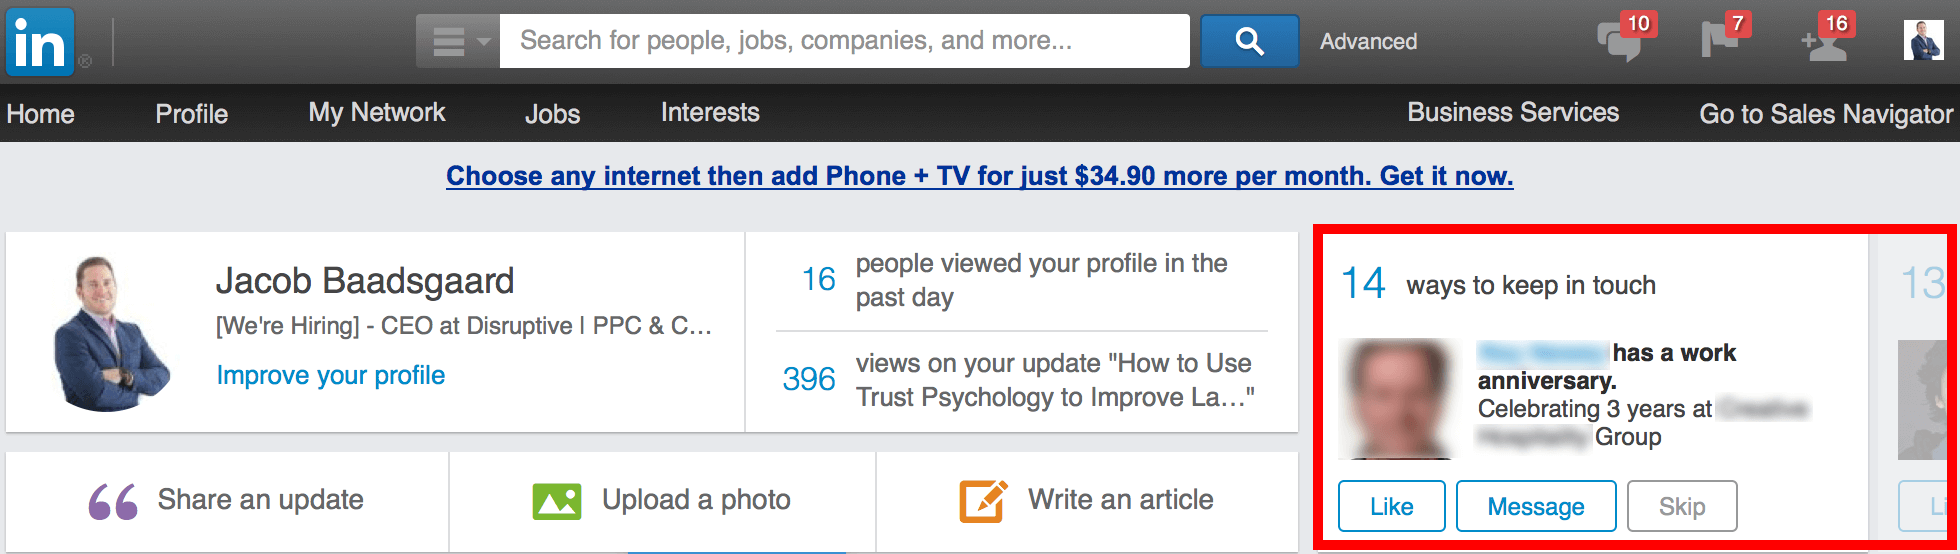 How to Get More LinkedIn Sales Leads in 5 Simple Steps